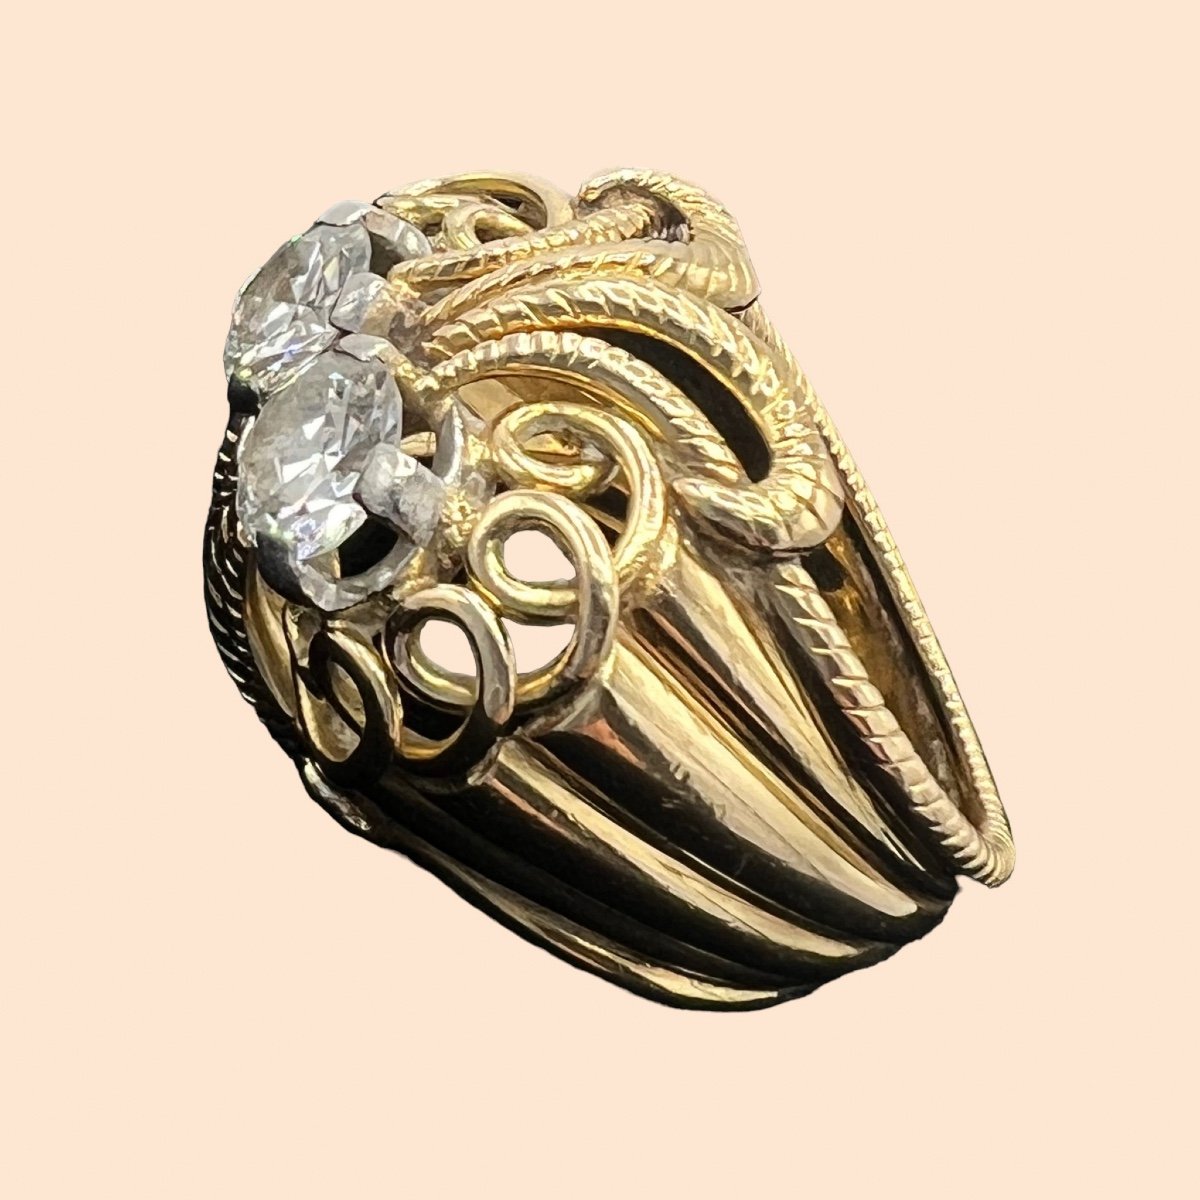 Superb Cocktail Ring From The 1950s In 18 Carat Gold, Set With Two Modern Cut Diamonds,-photo-5